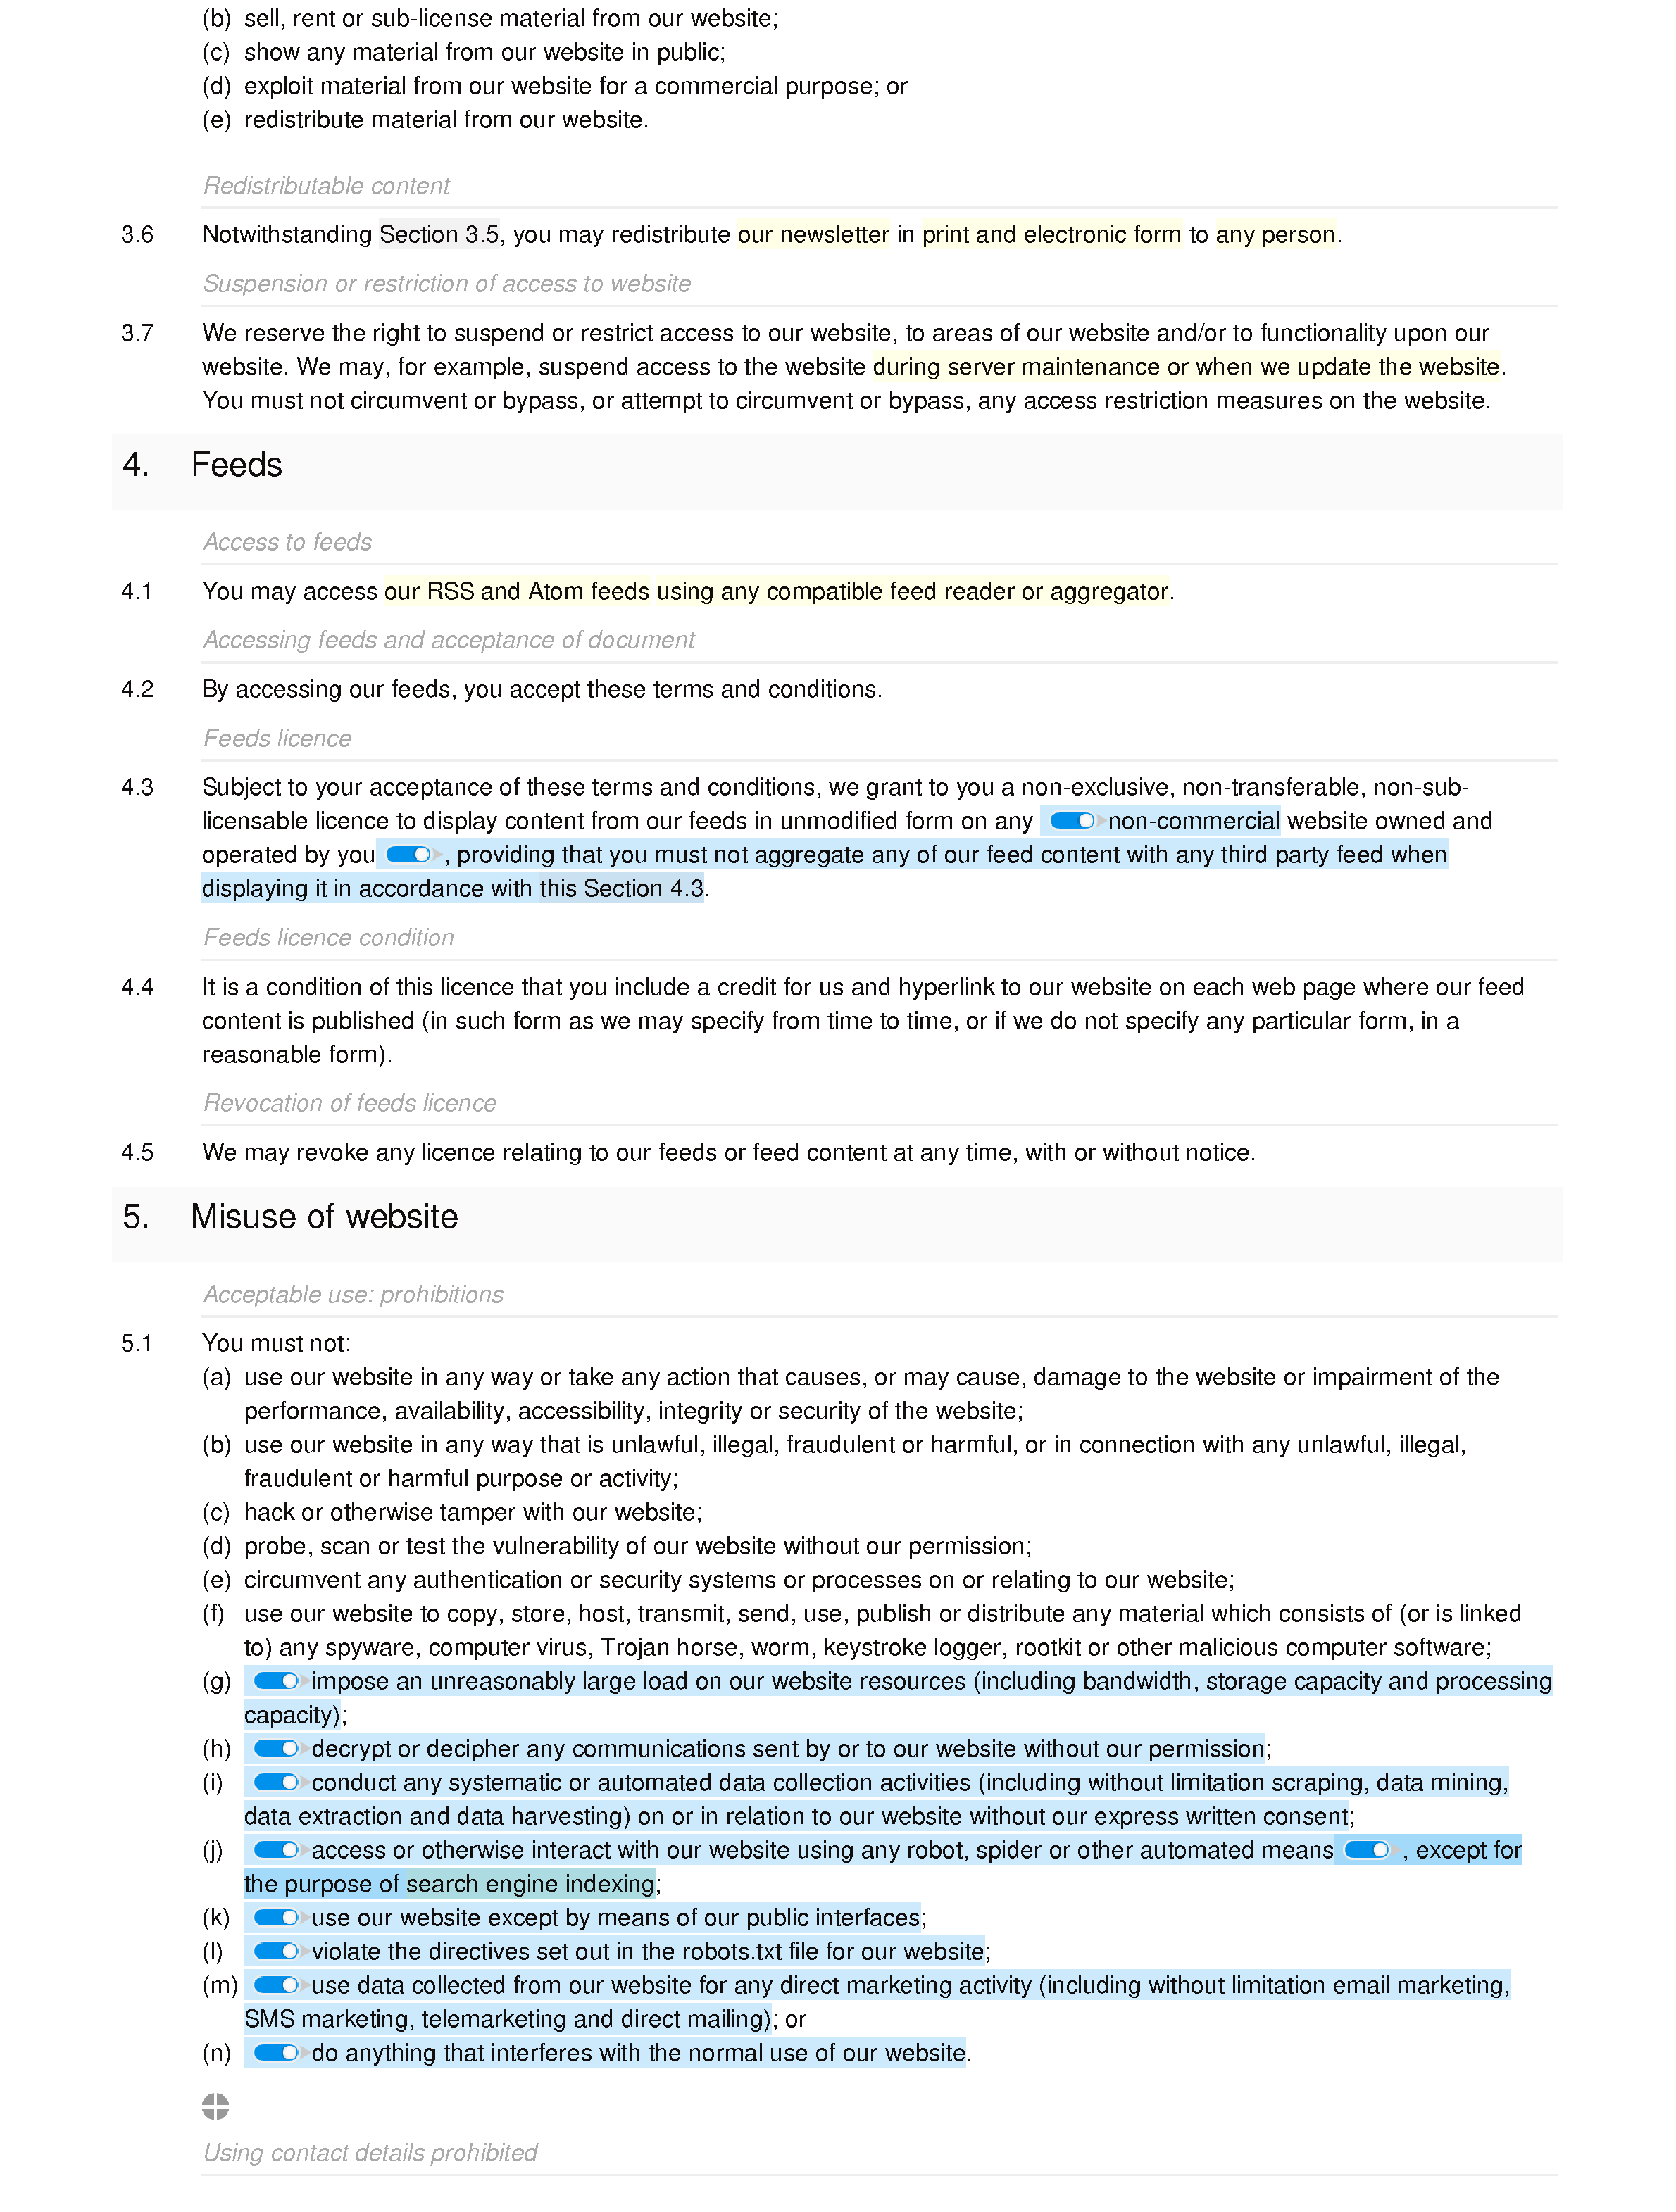 Medical website terms and conditions document editor preview